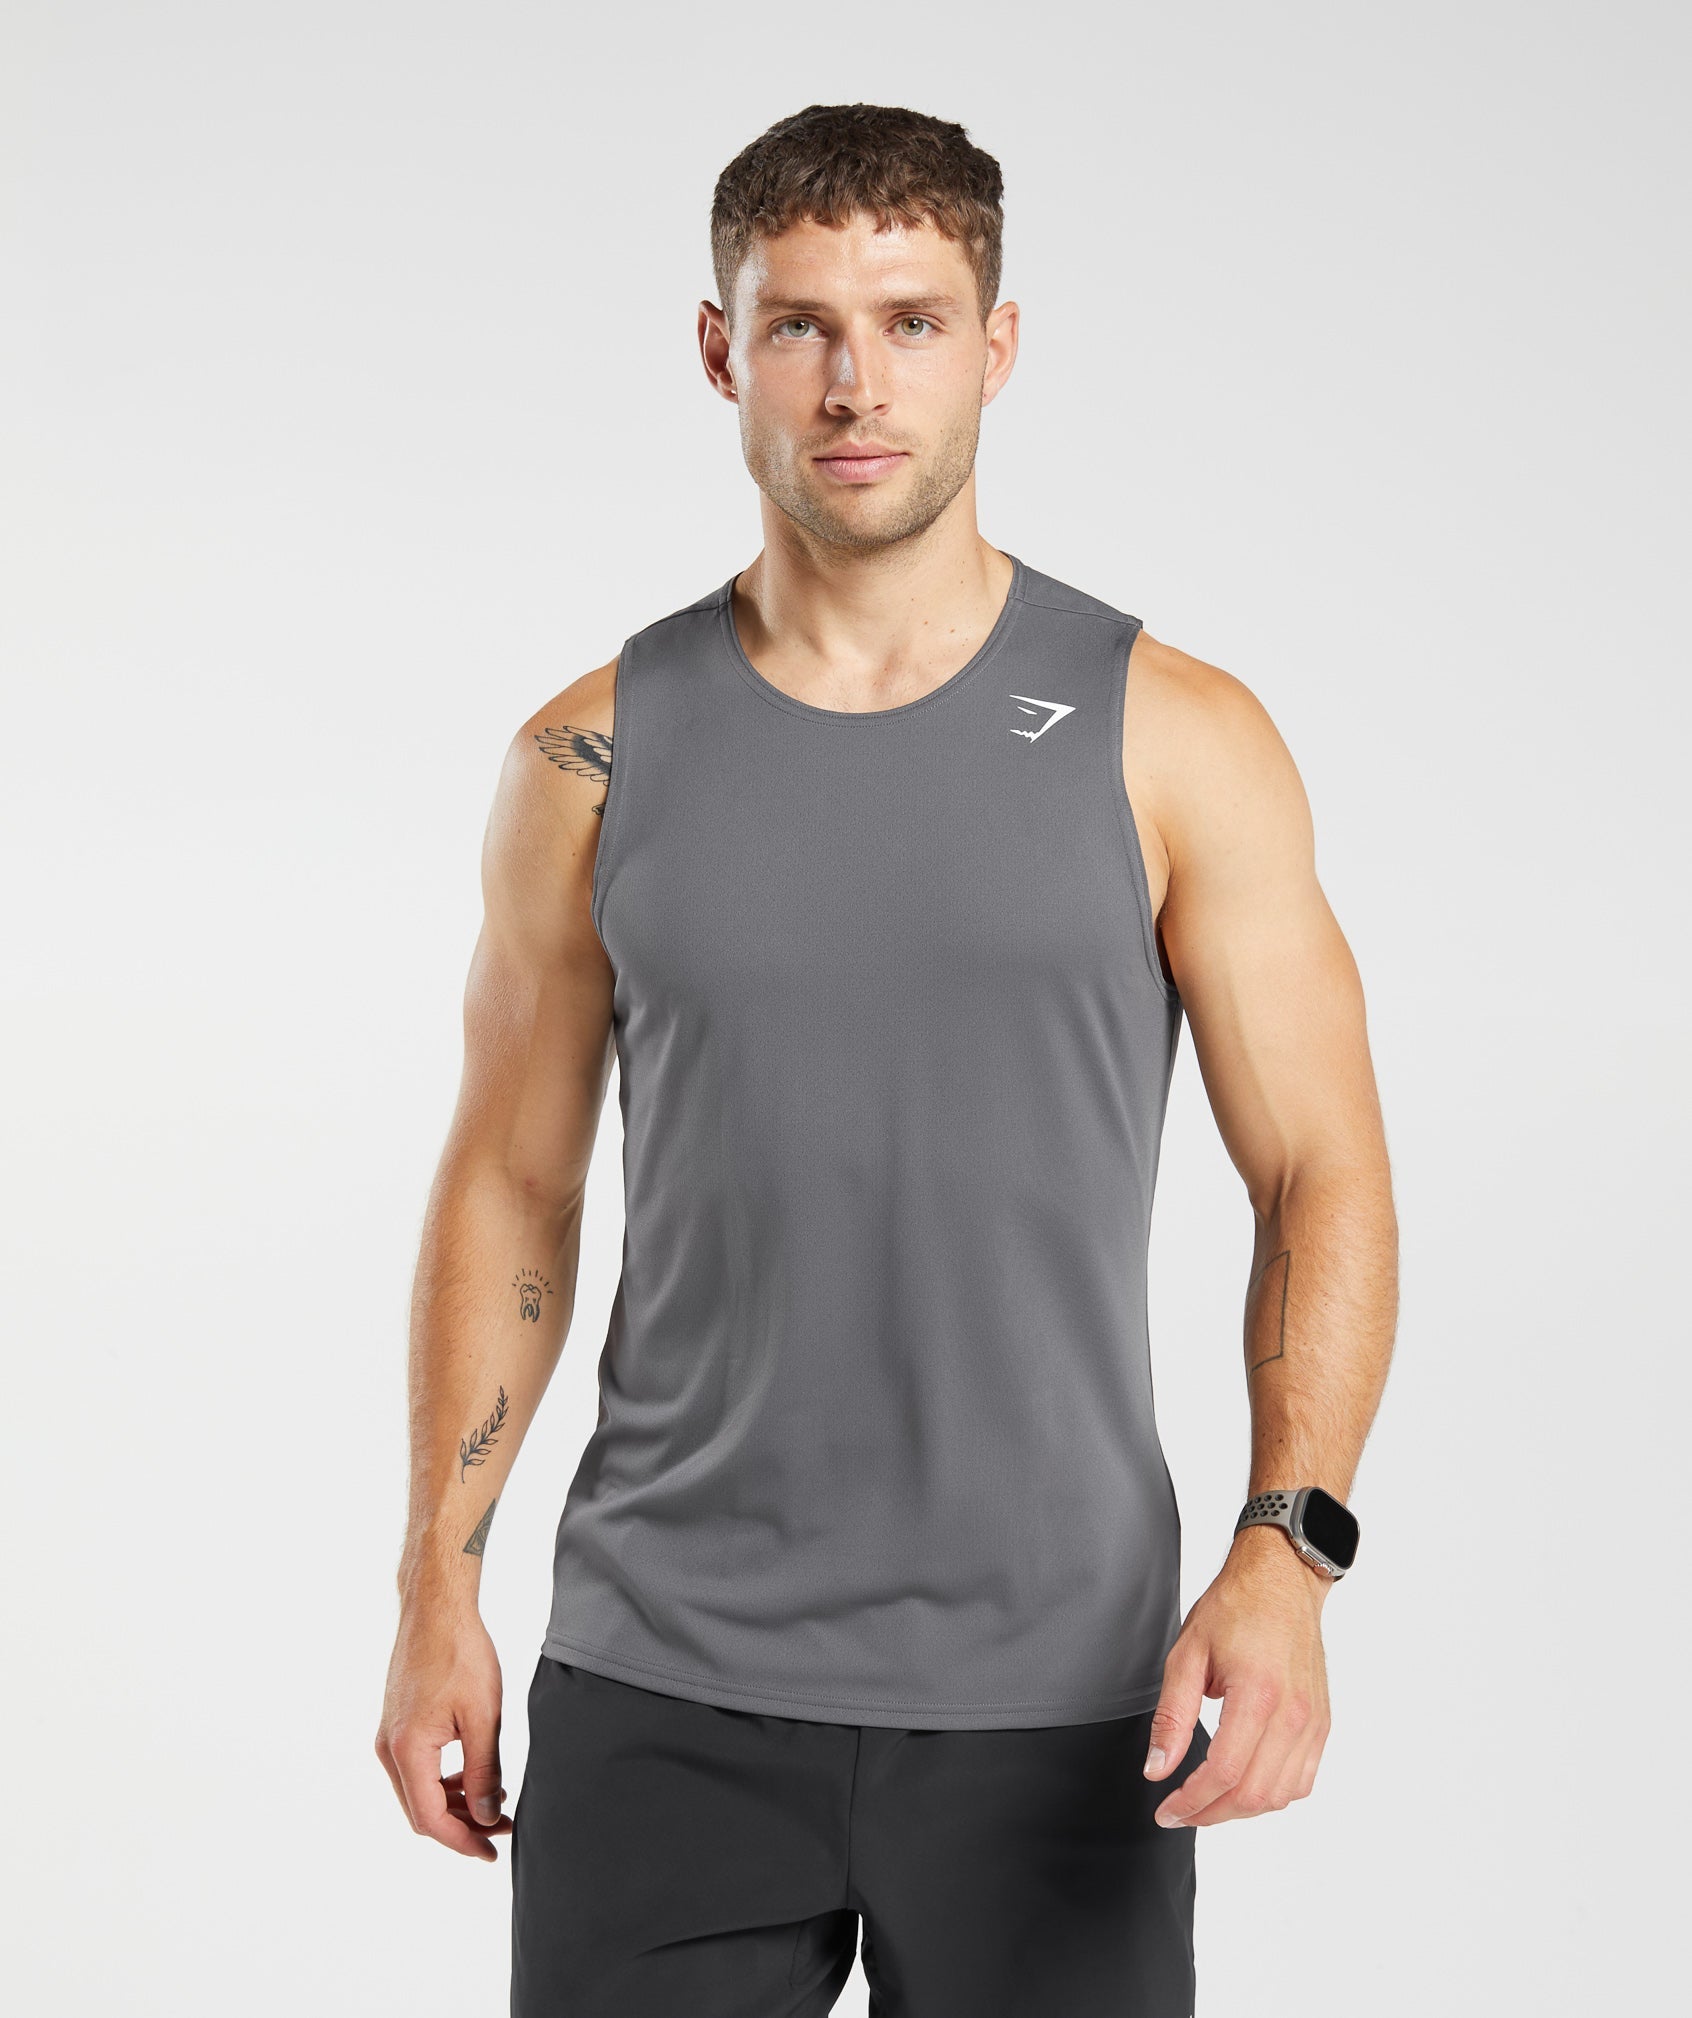 Arrival Tank in {{variantColor} is out of stock